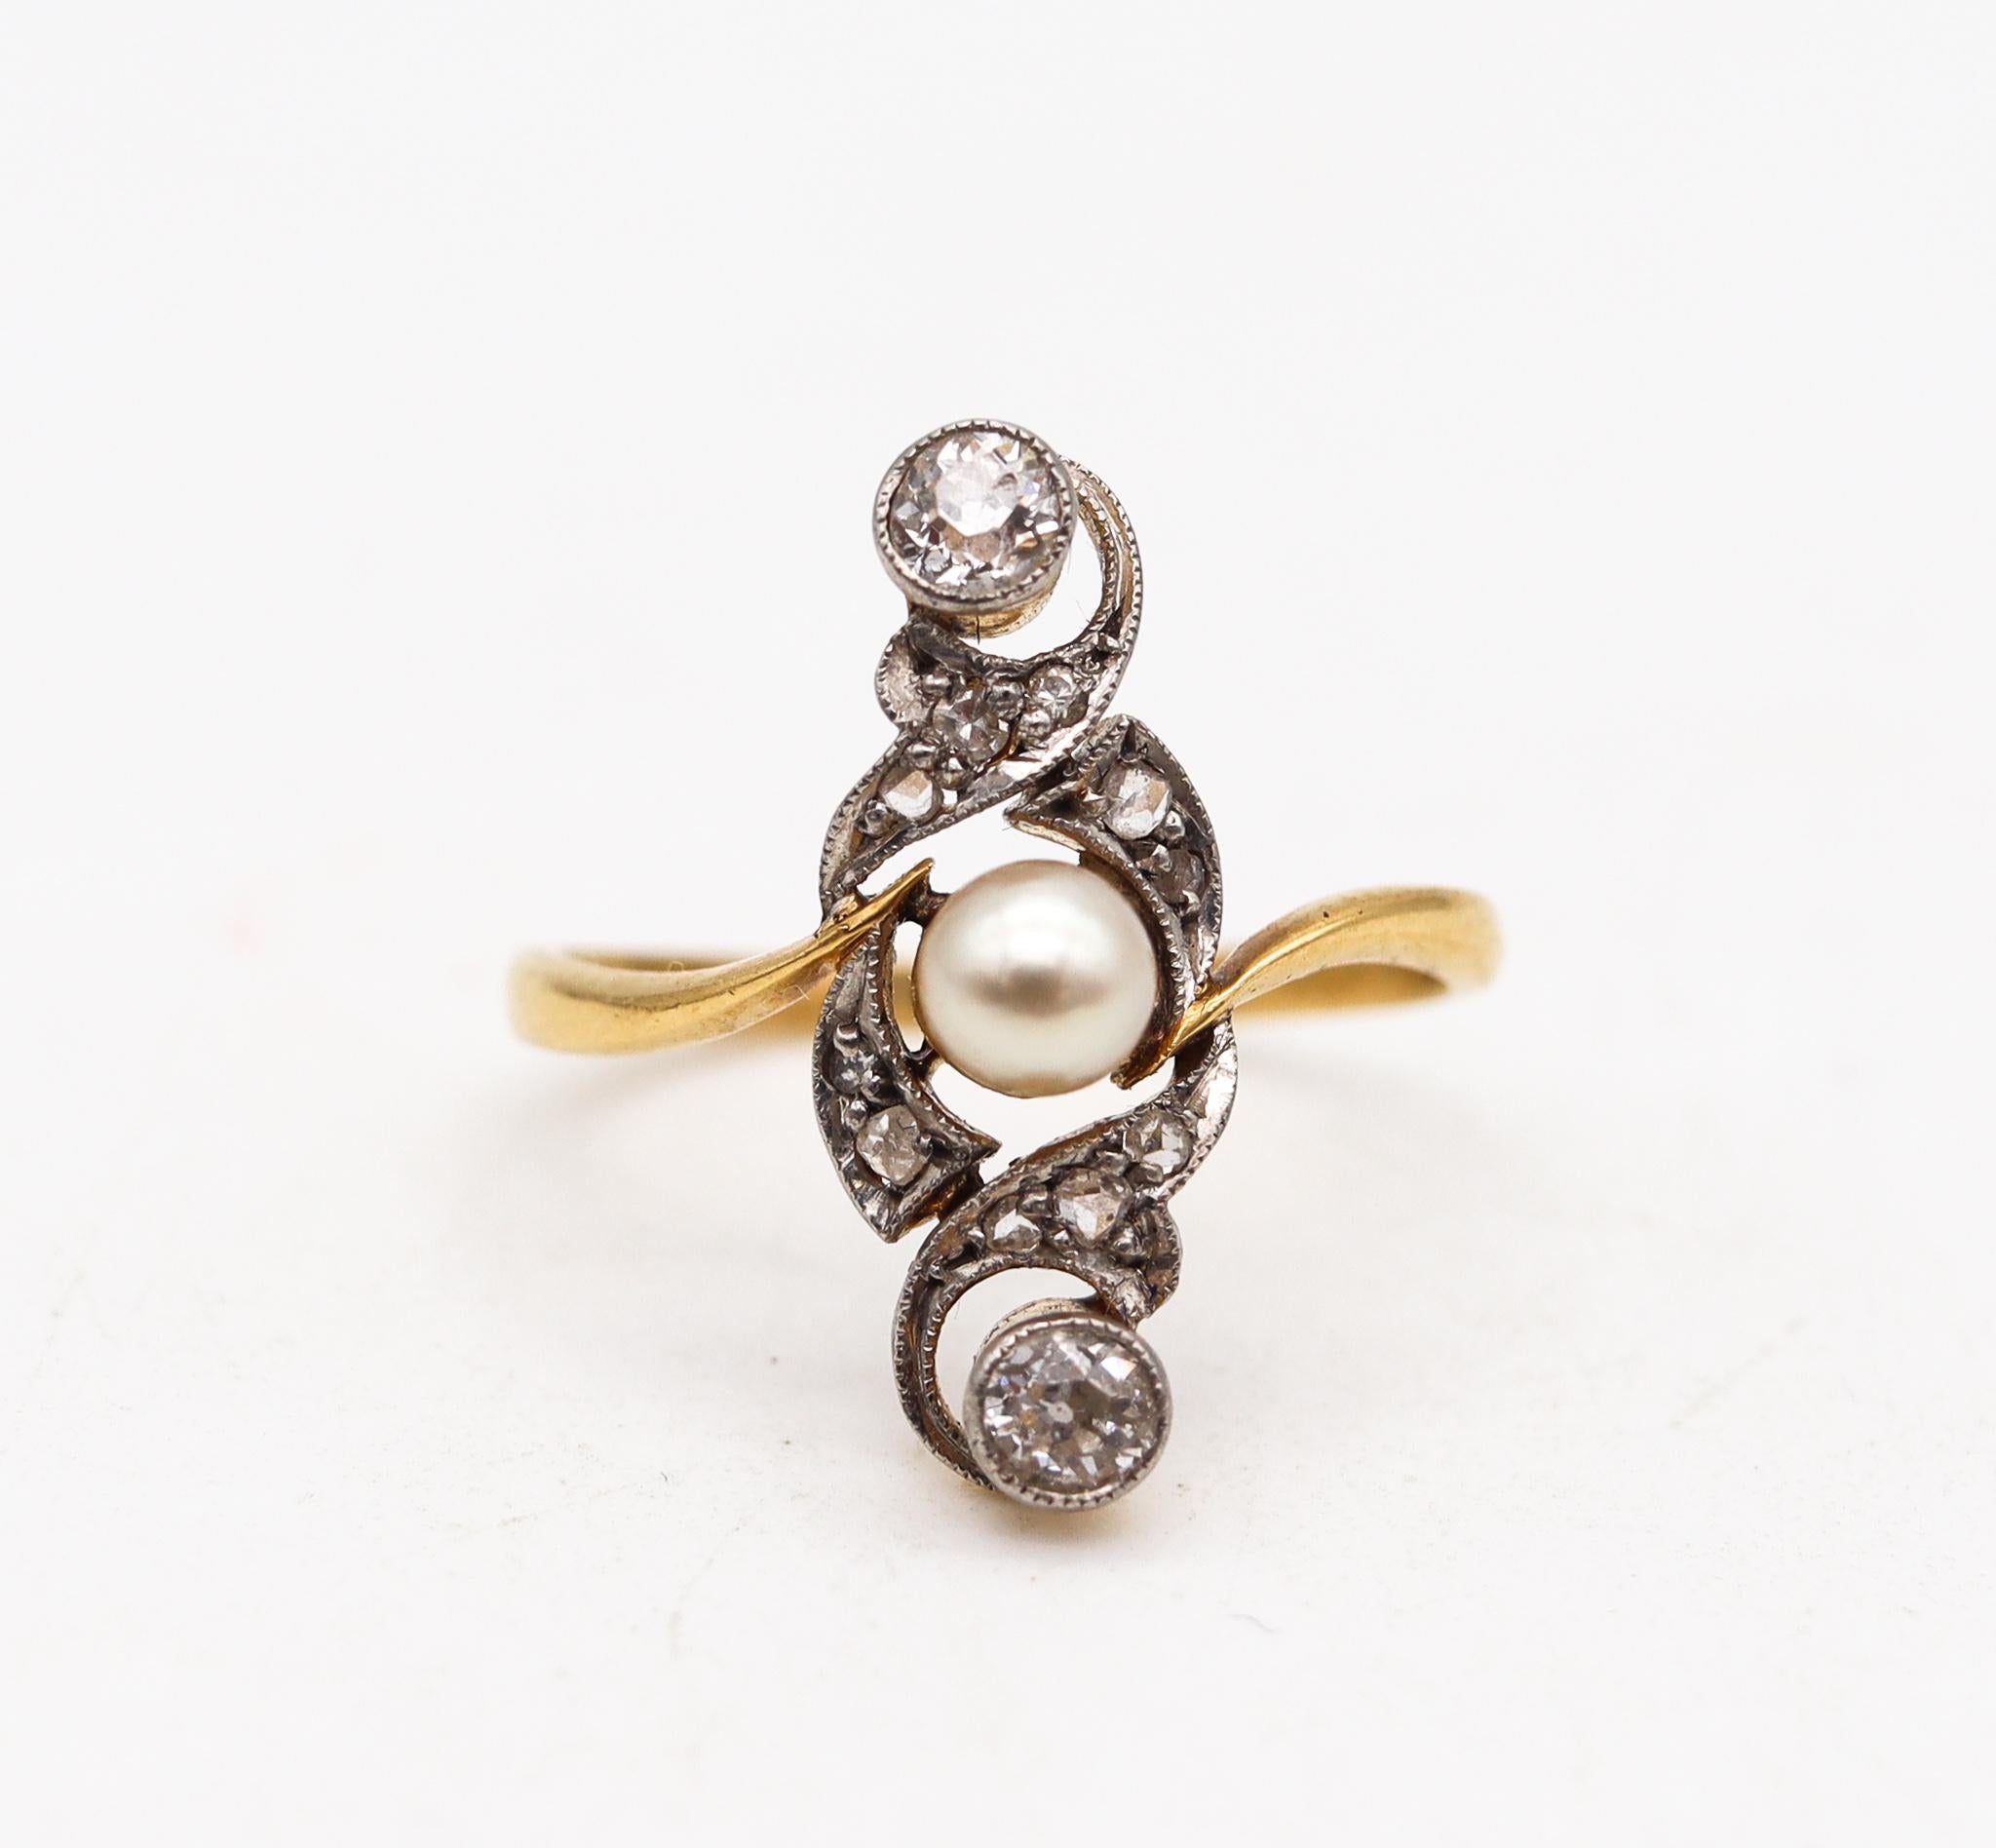 A transitional Edwardian - Art Nouveau ring.

A simple, elegant and very classic ring, created back in the 1910 during the transitional periods of the Edwardian and the Art Nouveau. It was carefully crafted in solid yellow gold of 18 karats with